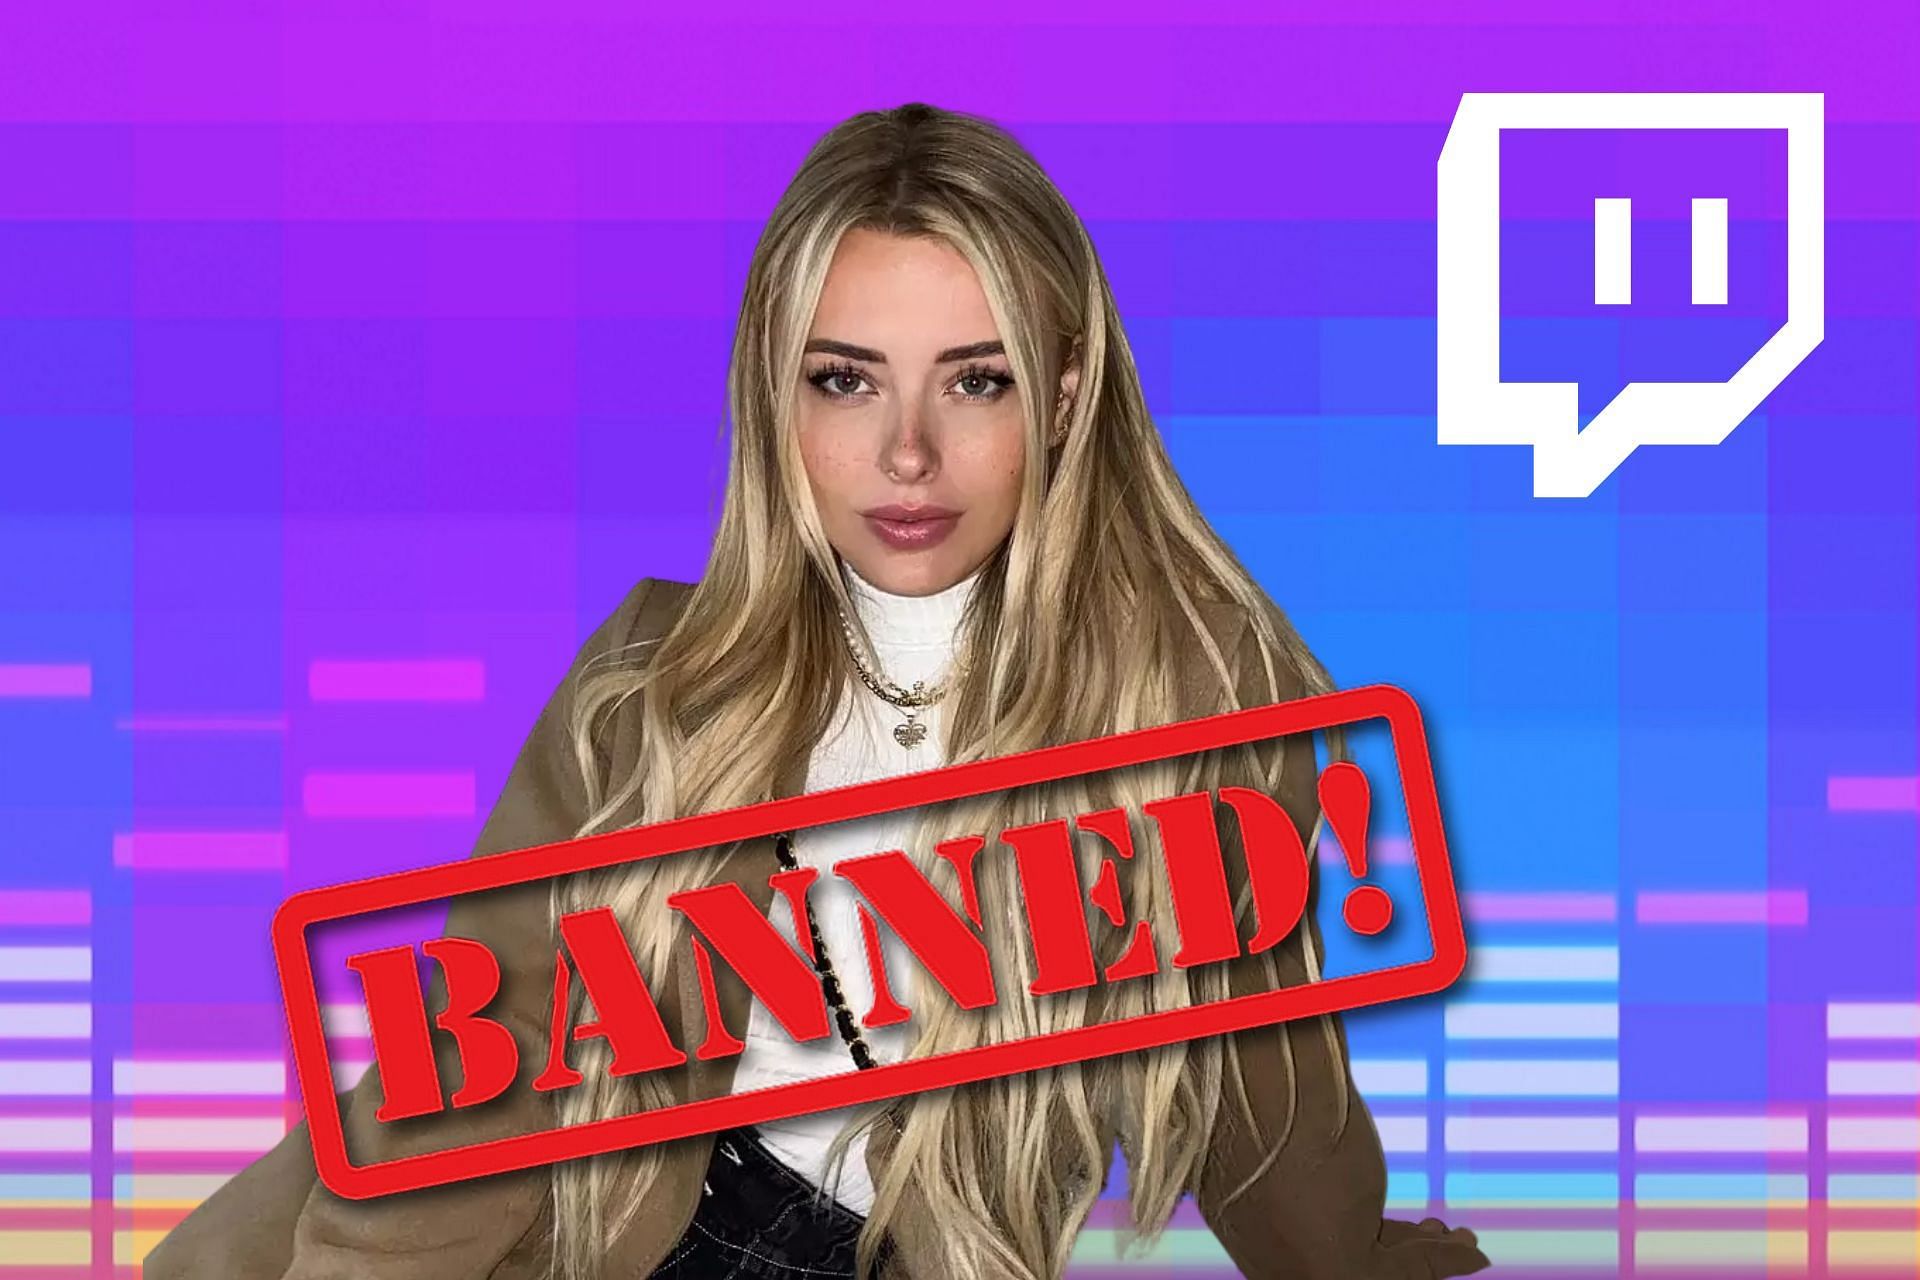 Corinna Kopf, a Twitch streamer, recently caught a 24-hour ban for her Twitch profile image (Image via Sportskeeda)